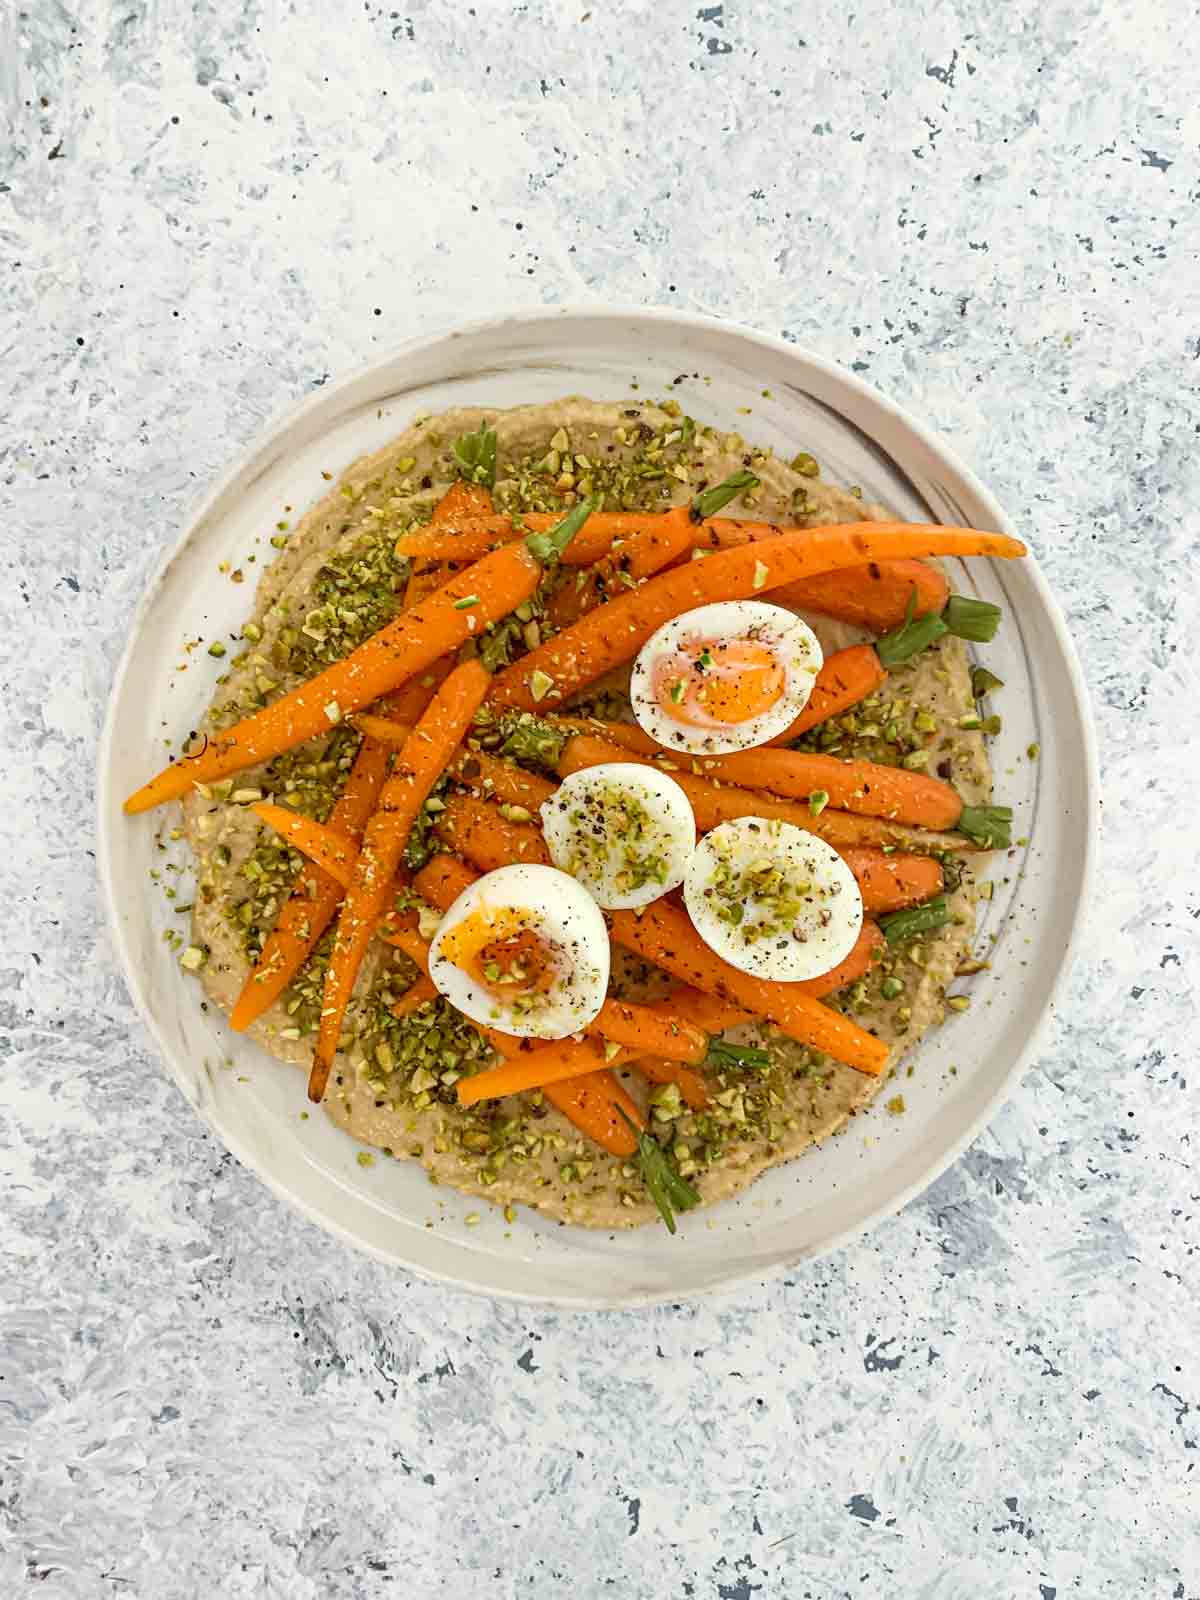 Salad of Dutch Carrots, Hummus and Soft-Boiled Eggs on a white marbled plate